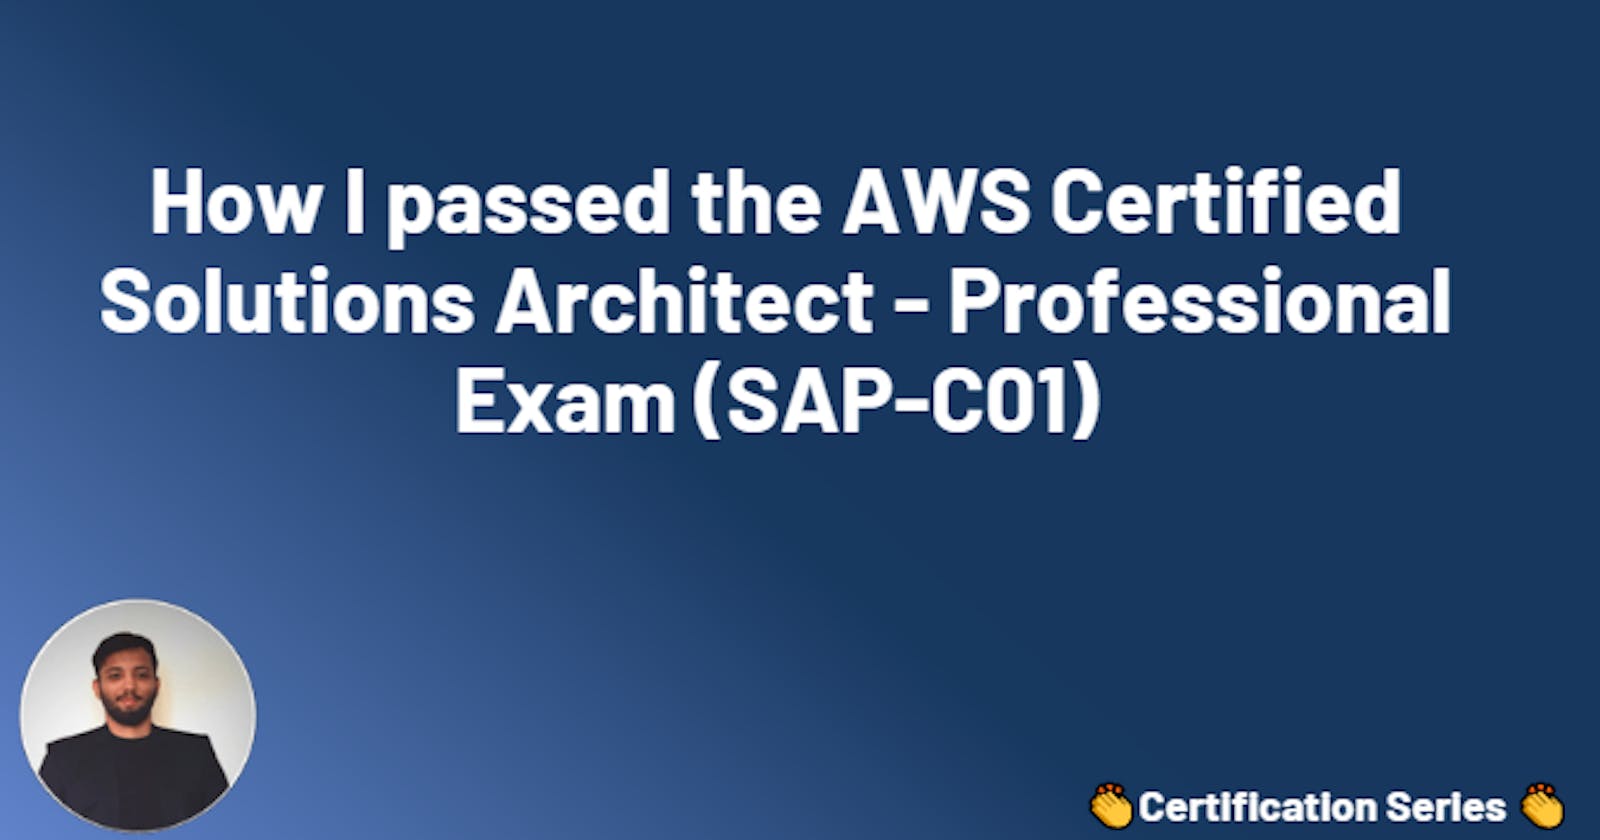 How I passed the AWS Certified Solutions Architect - Professional Exam (SAP-C01)